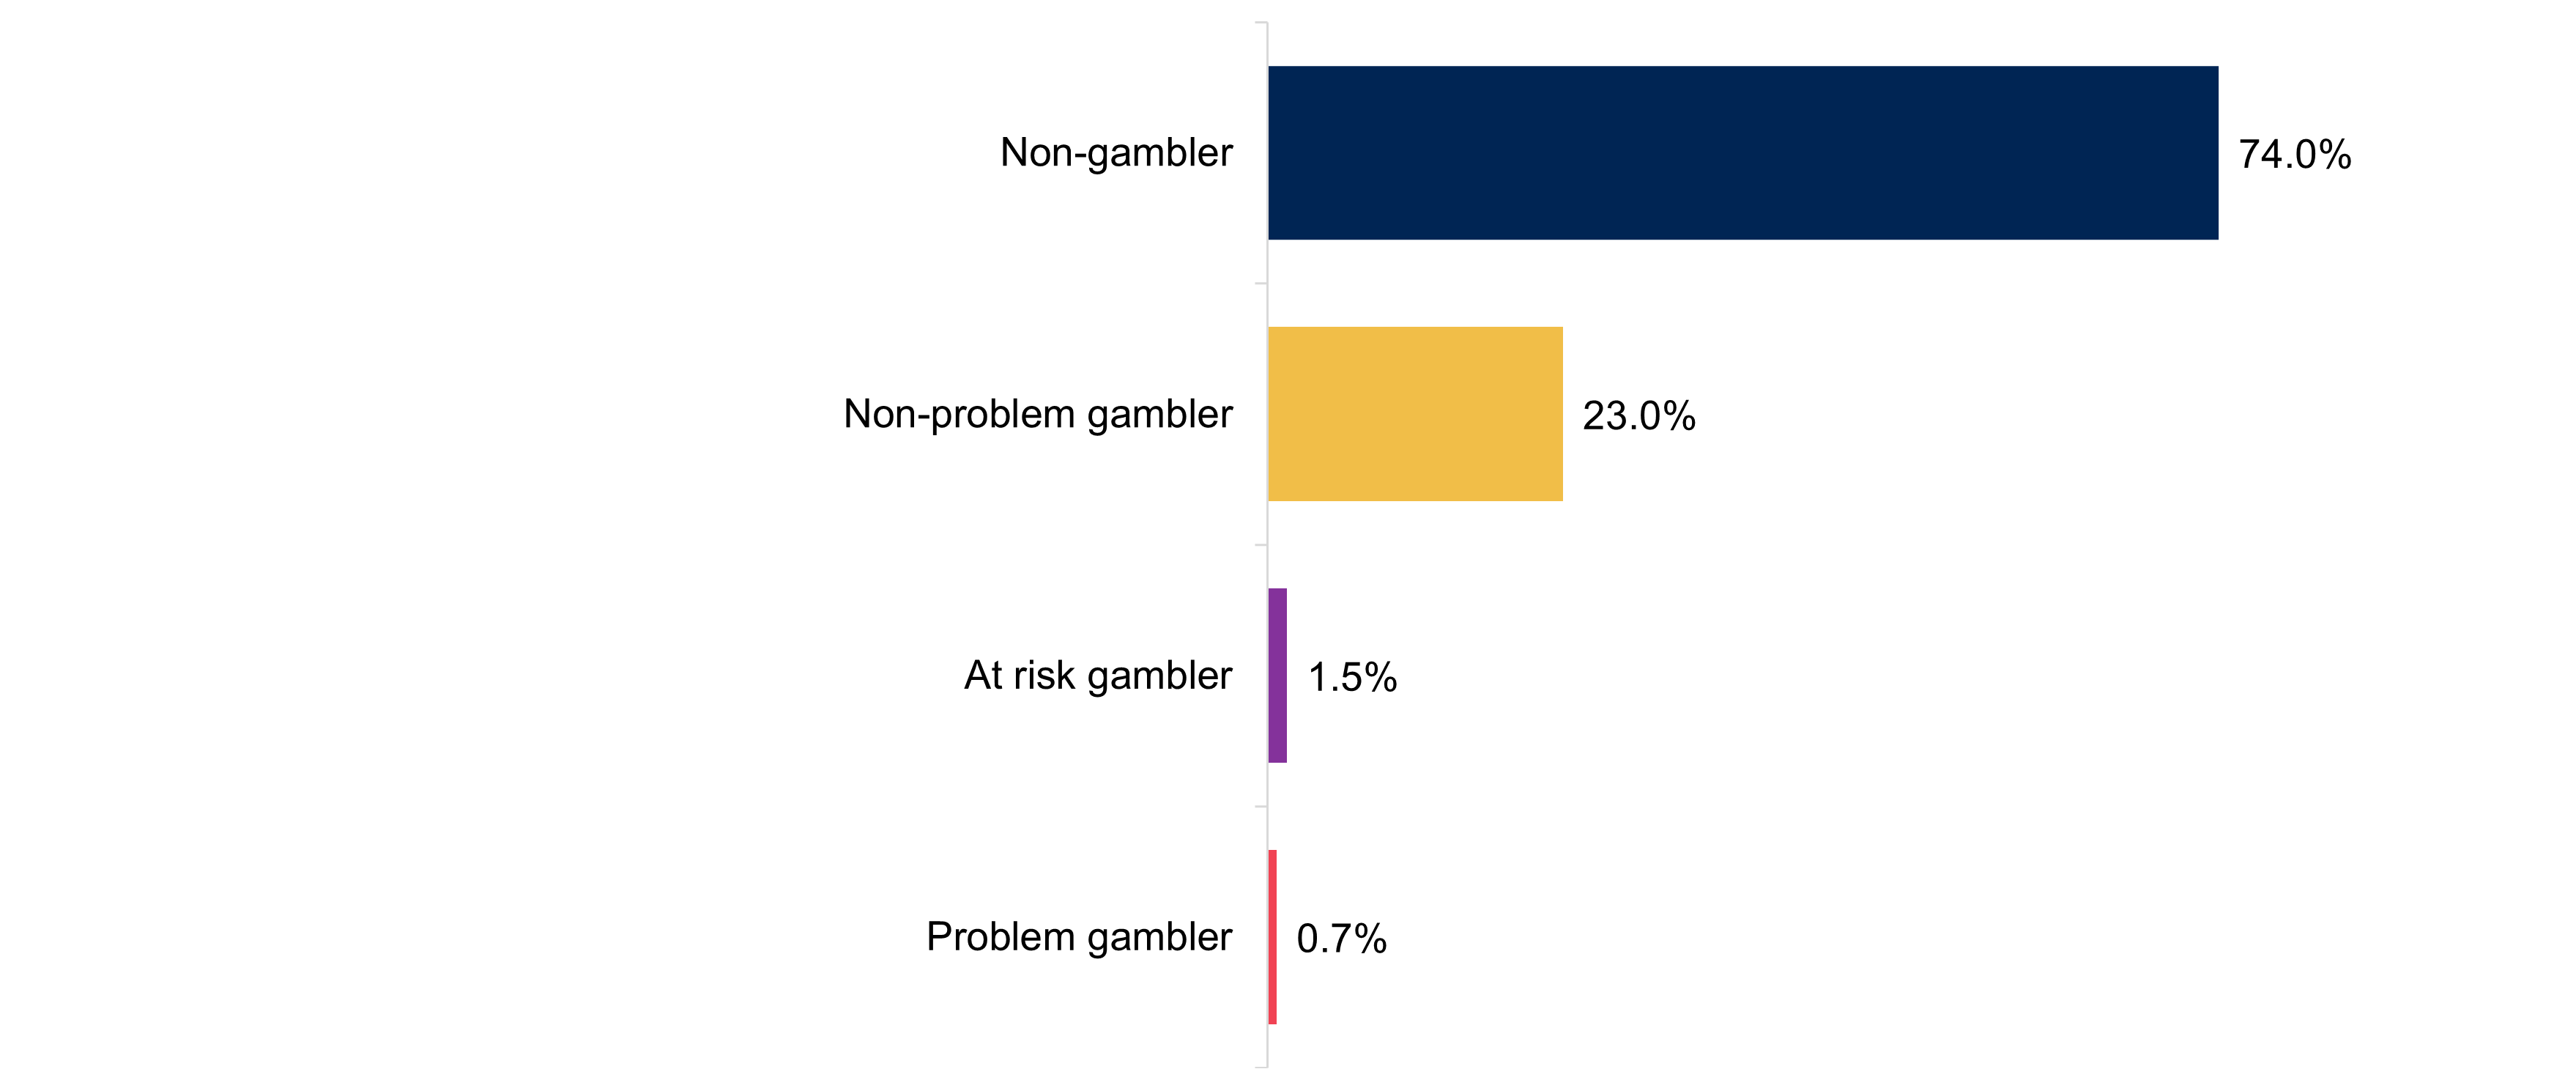 A bar chart showing the types of gambler defined by the youth-adapted problem gambling screen. Data from the chart is provided within the following table.